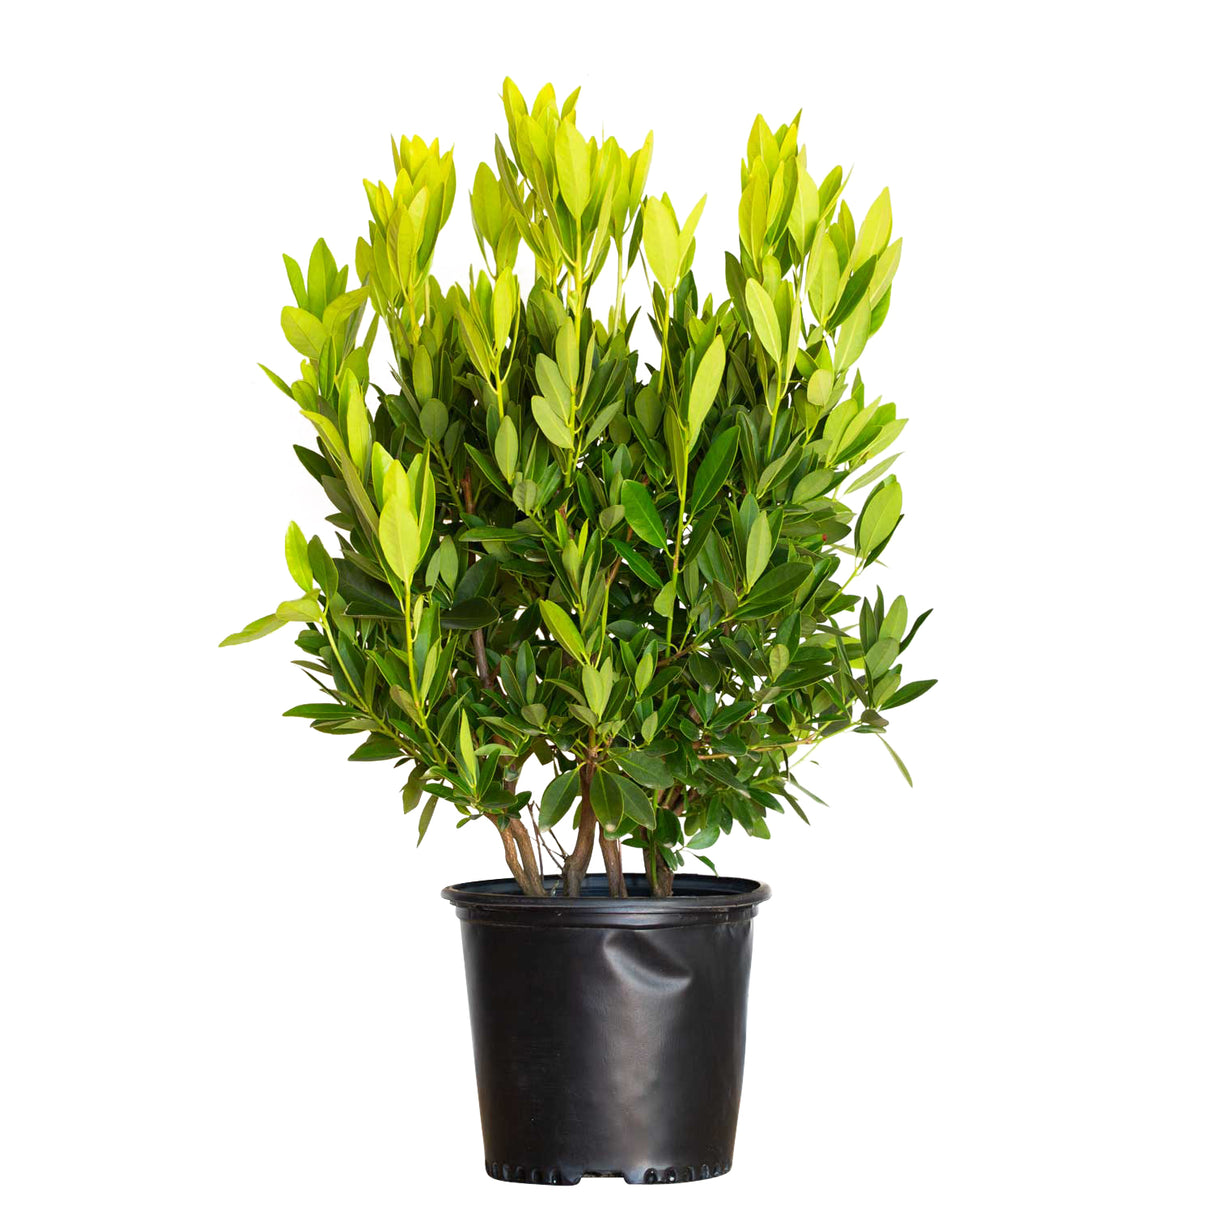 2.5 Gallon Illicium Parviflorum for sale with bright yellow new foliage and dark green mature foliage on an upright shrub in a black nursery pot on a white background